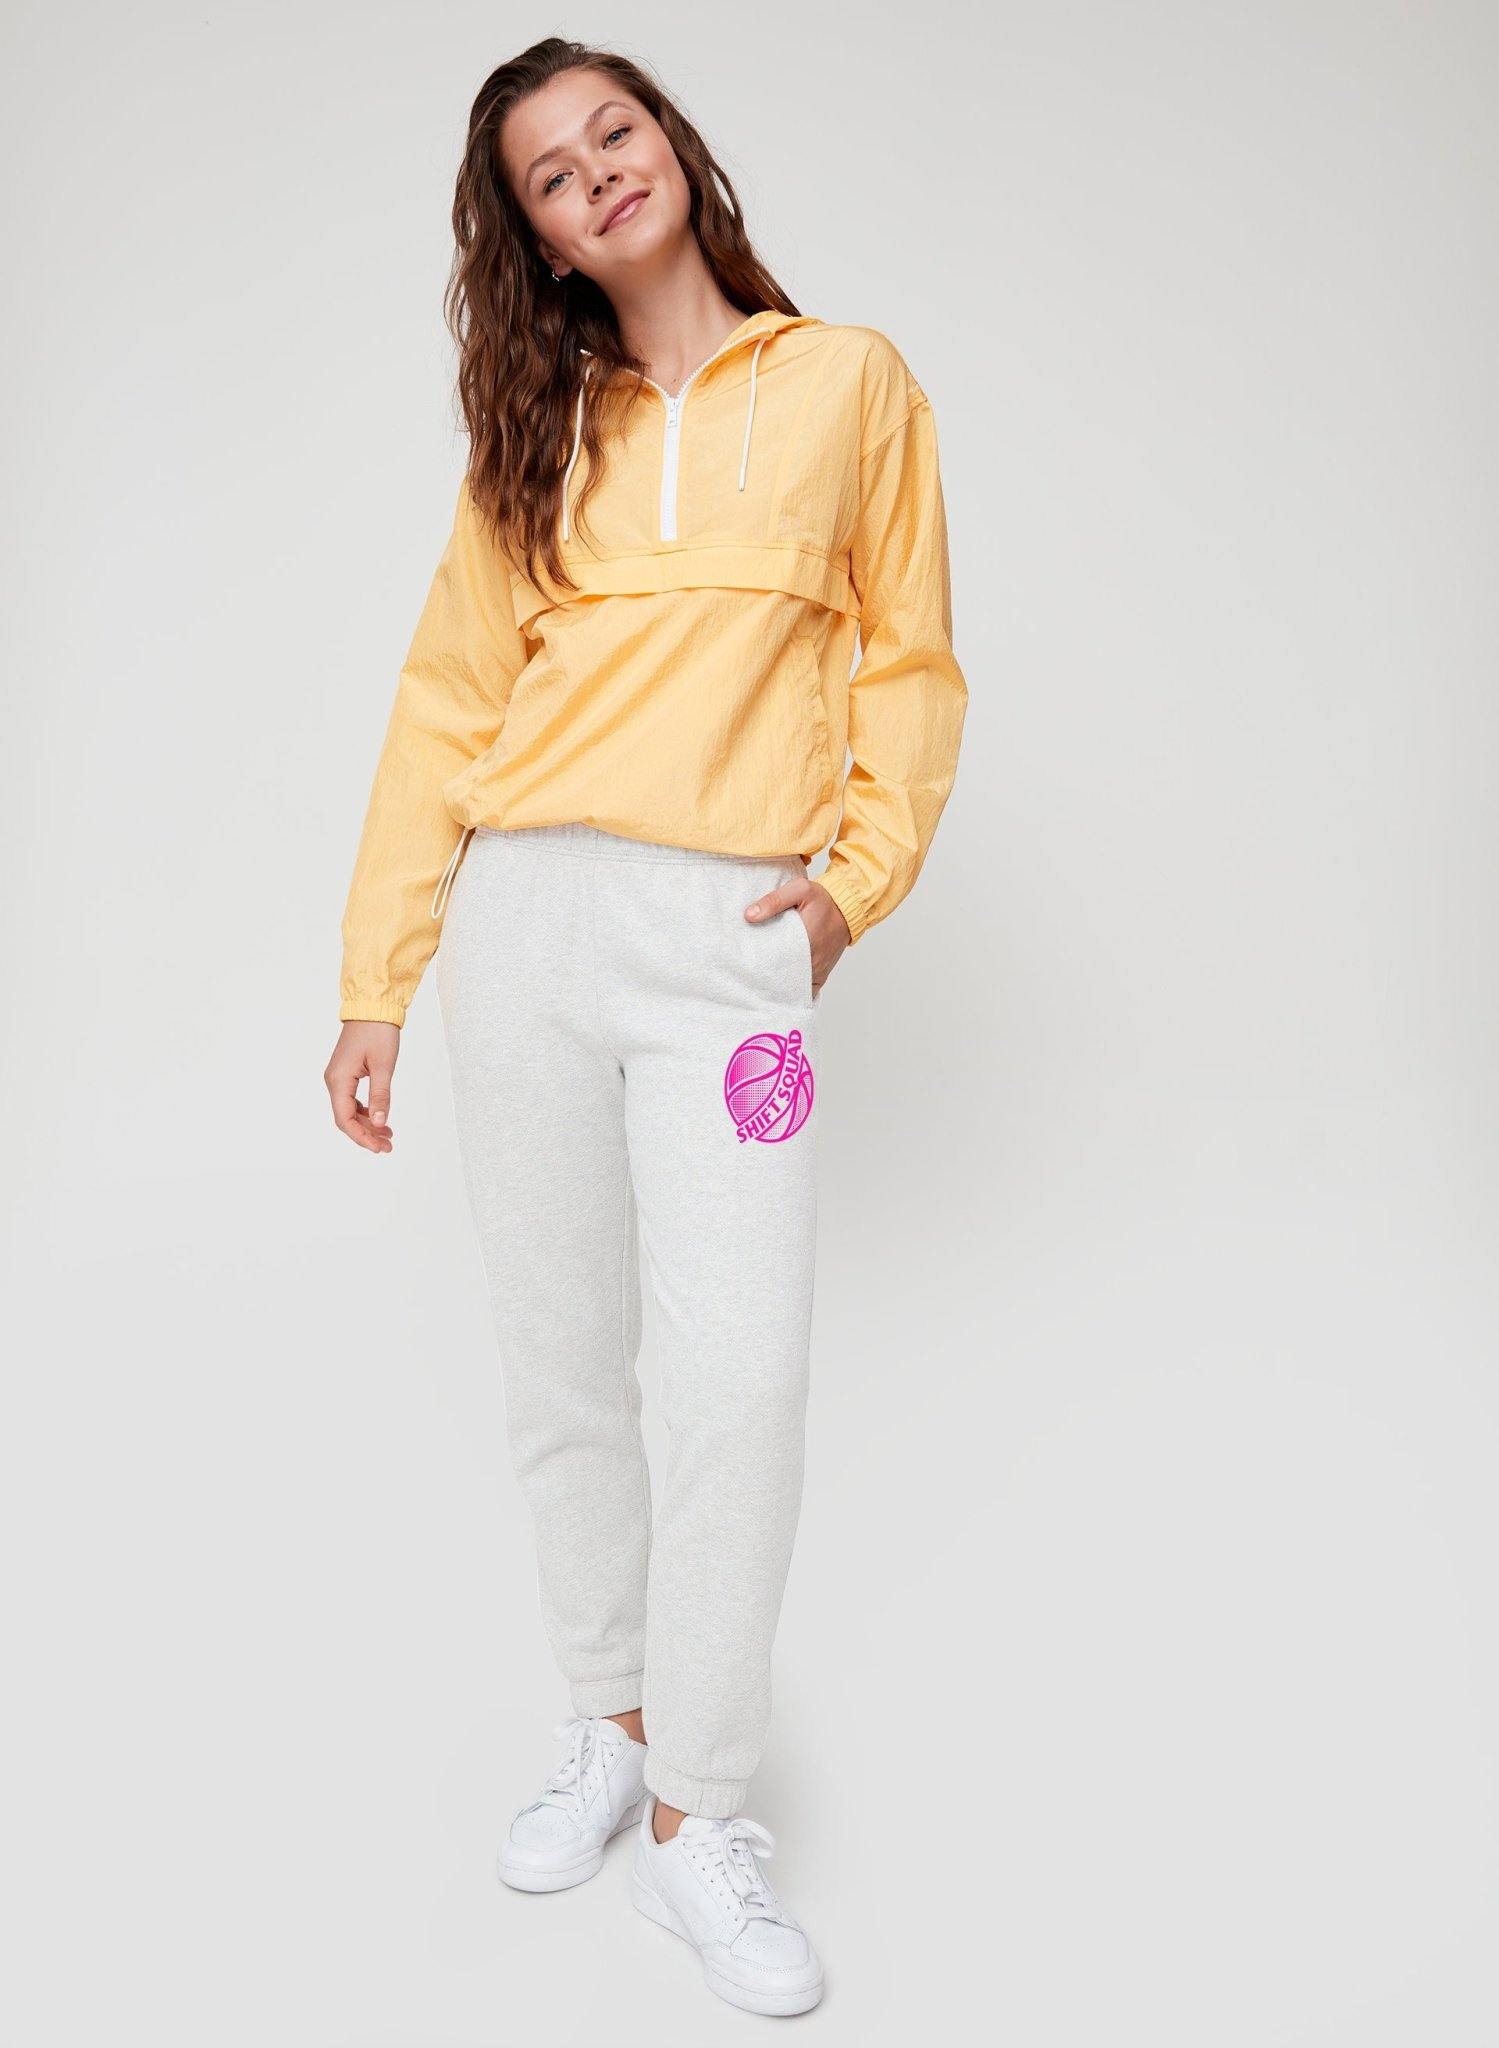 Sweatpants Women Spring and Summer Line | Shiftsquad